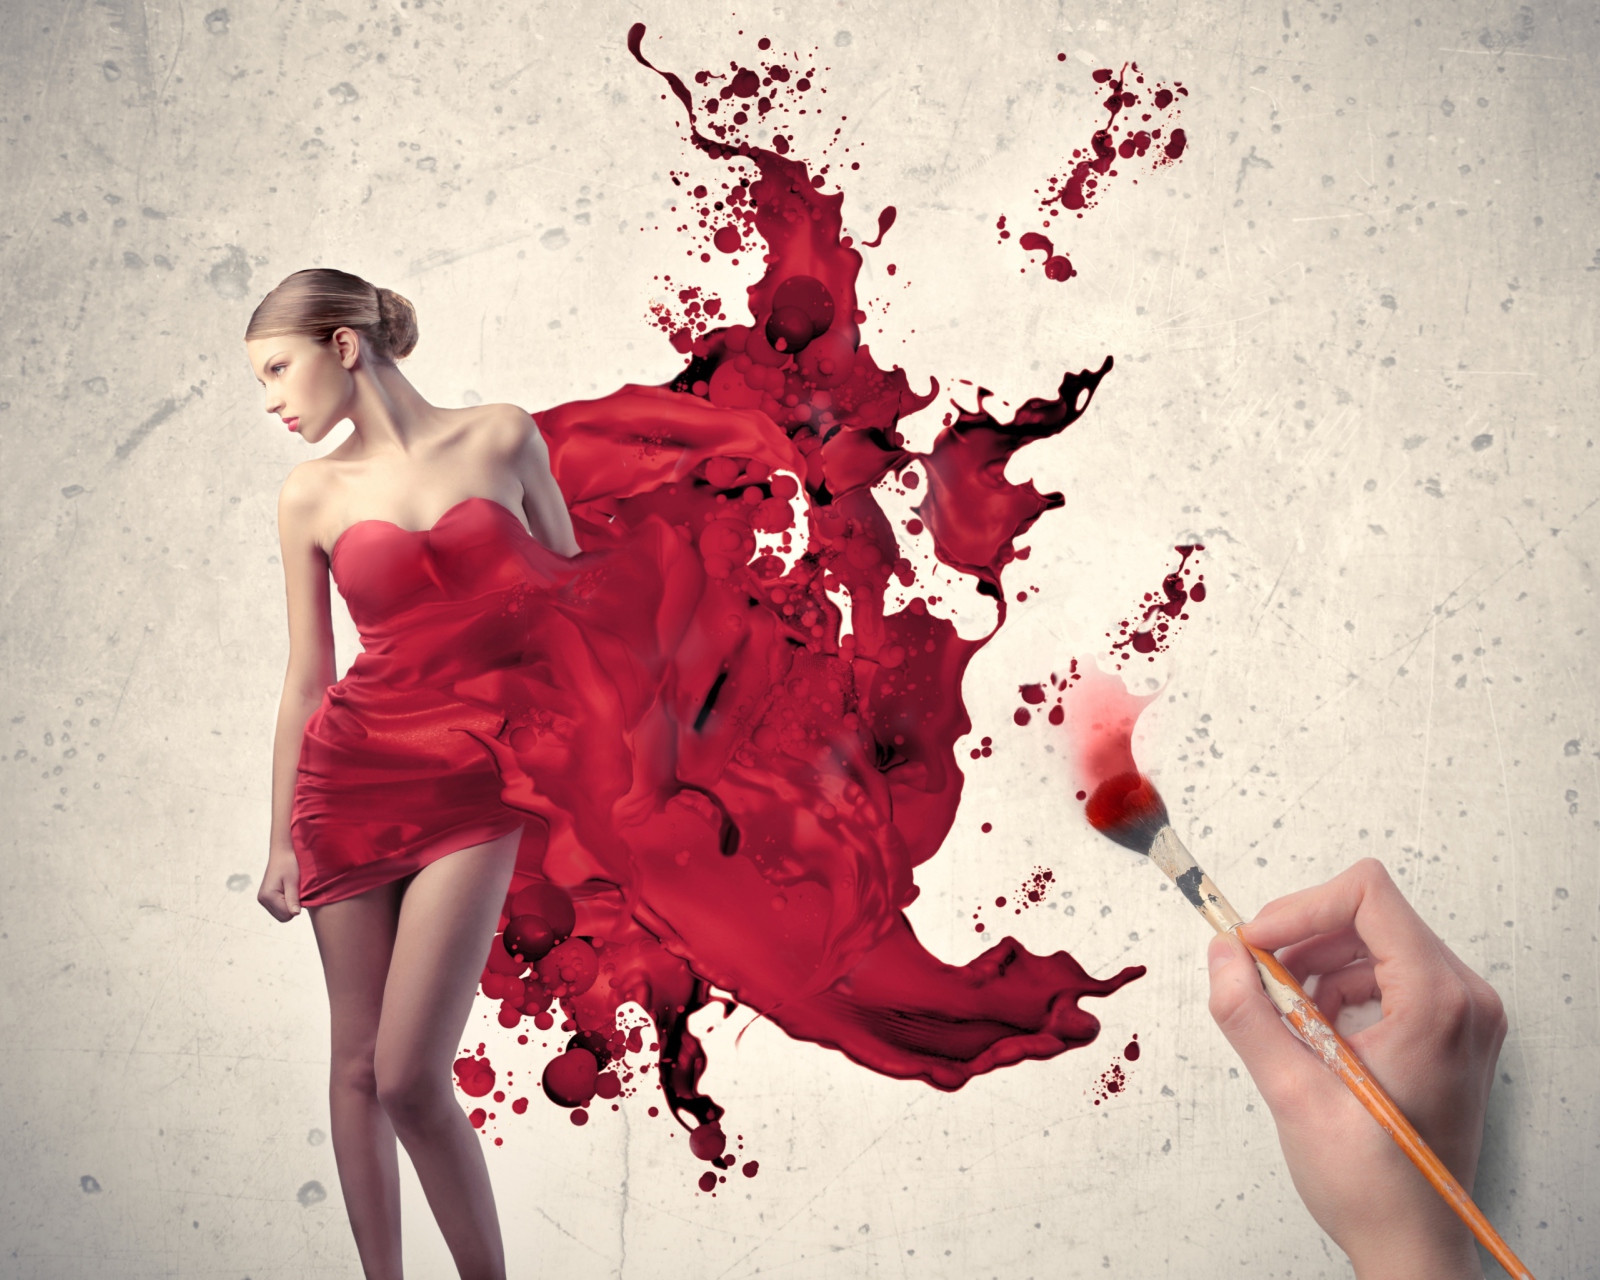 Girl In Painted Red Dress wallpaper 1600x1280